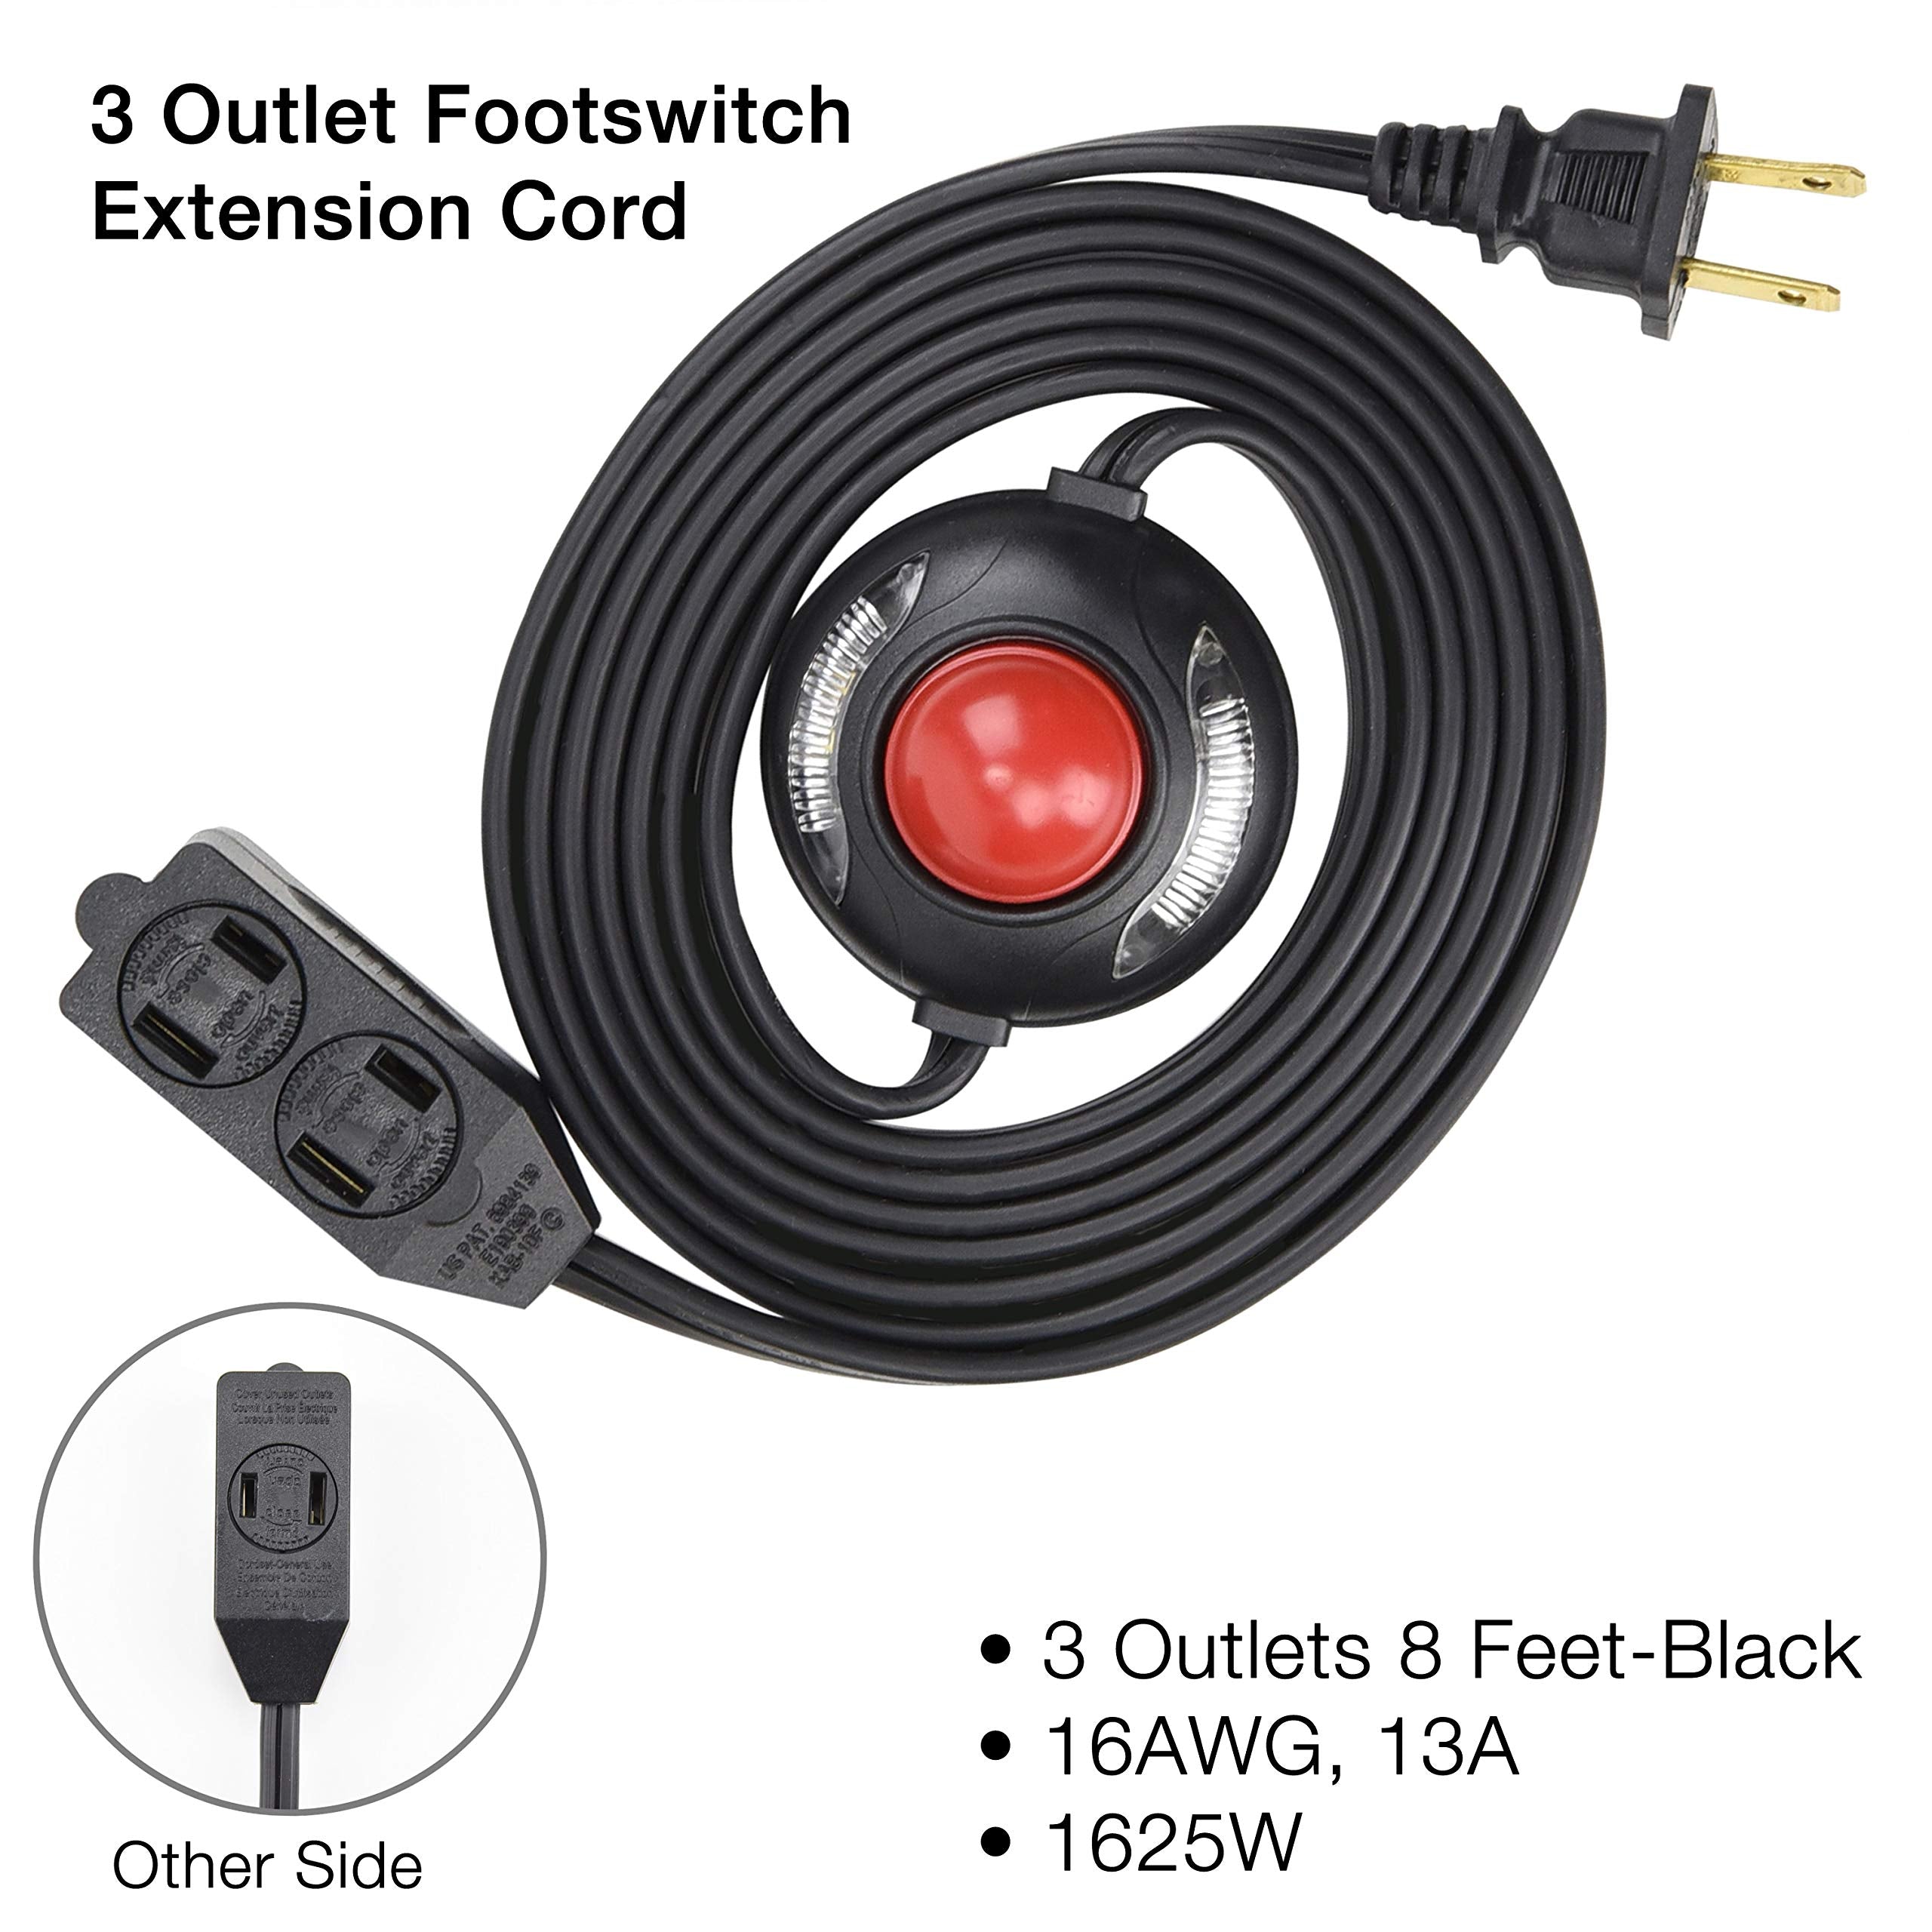 Electes 3 Outlet Extension Cord with Hand/Foot Switch and Light Indicator with Safety Twist-Lock, 16/2, Black, UL Listed  - Like New